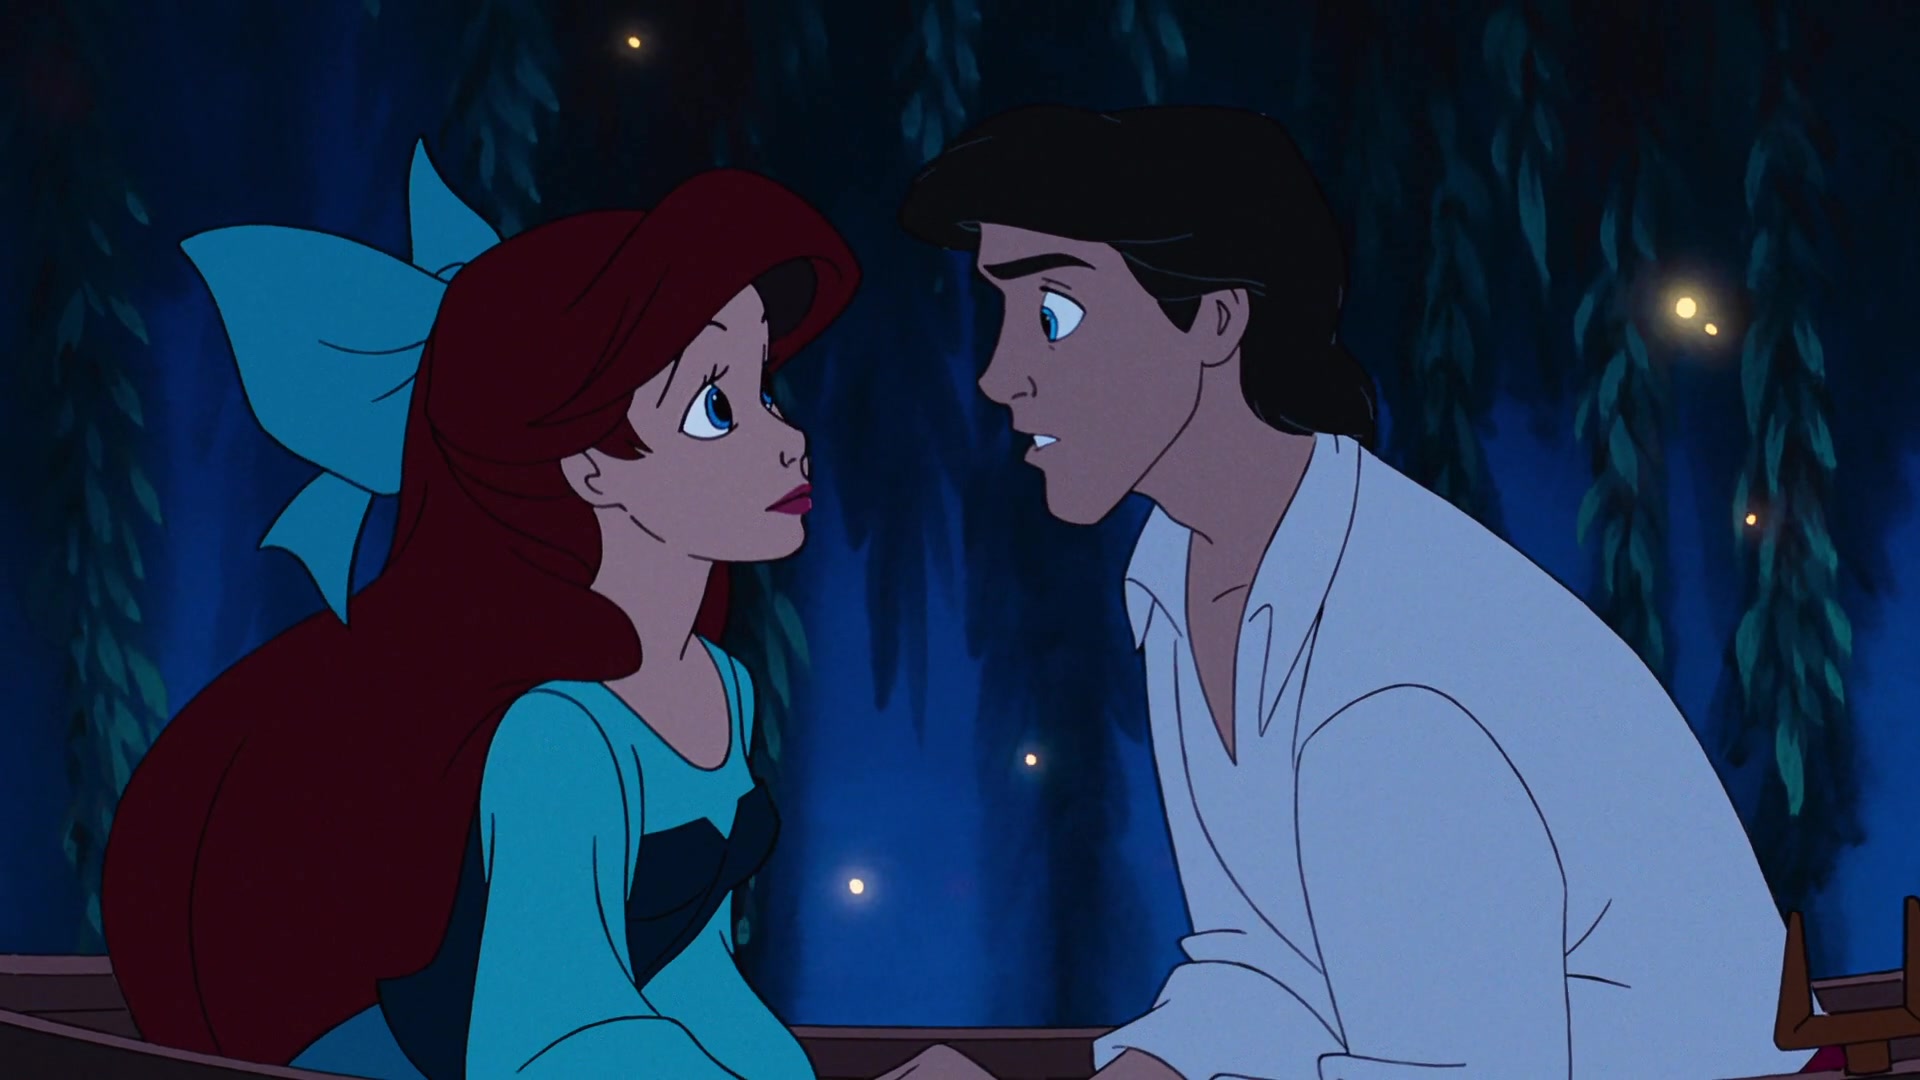 Ariel (Jodi Benson) and Prince Eric (Christopher Daniel Barnes) lean in to share their first kiss in The Little Mermaid (1989), Disney